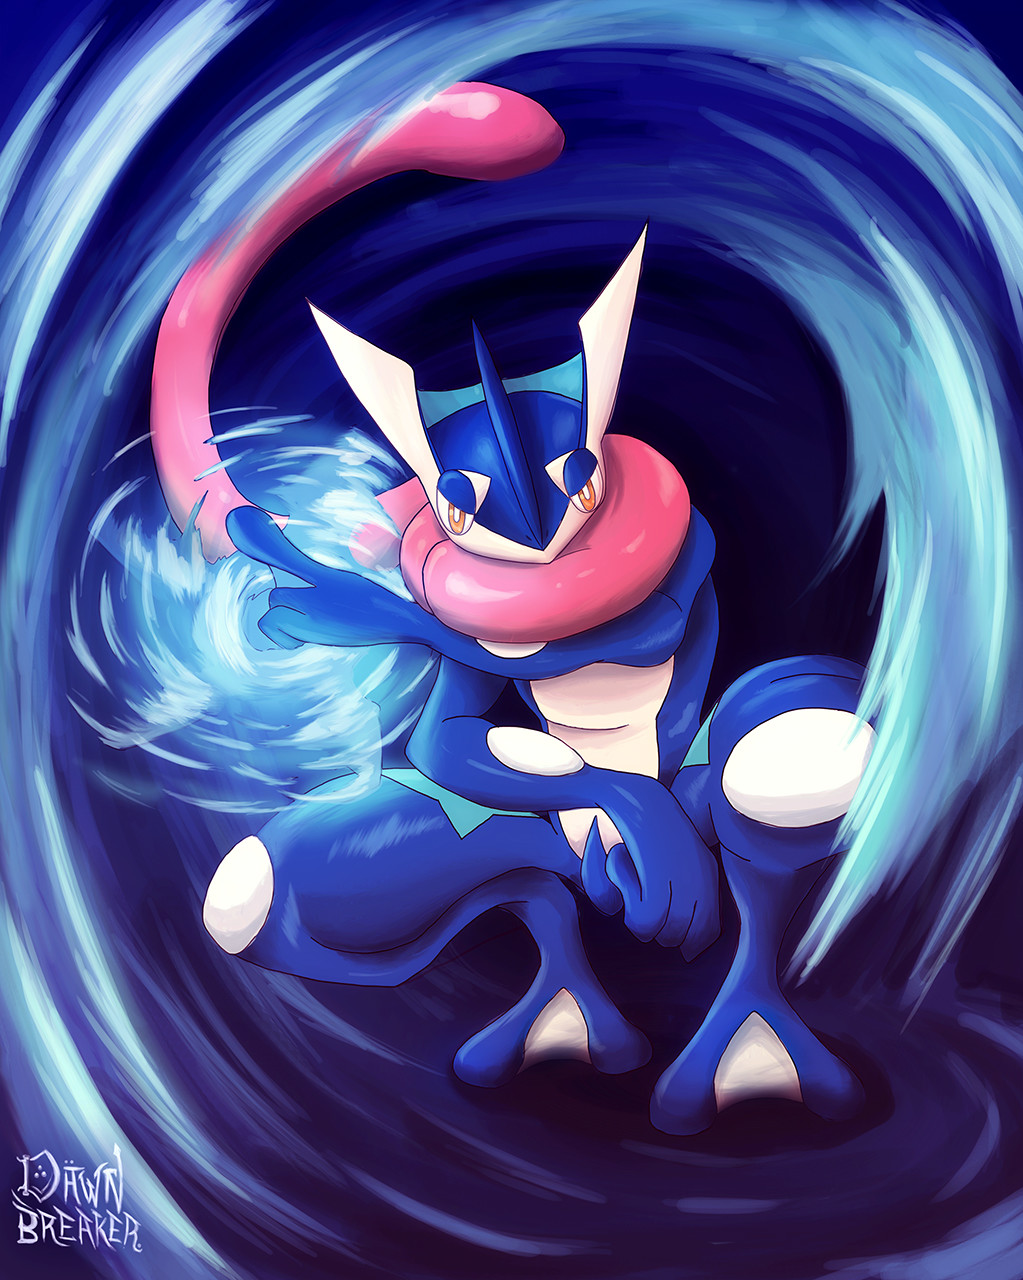 An illustration of Greninja that I did in 2013 after the launch of Pokémon ...